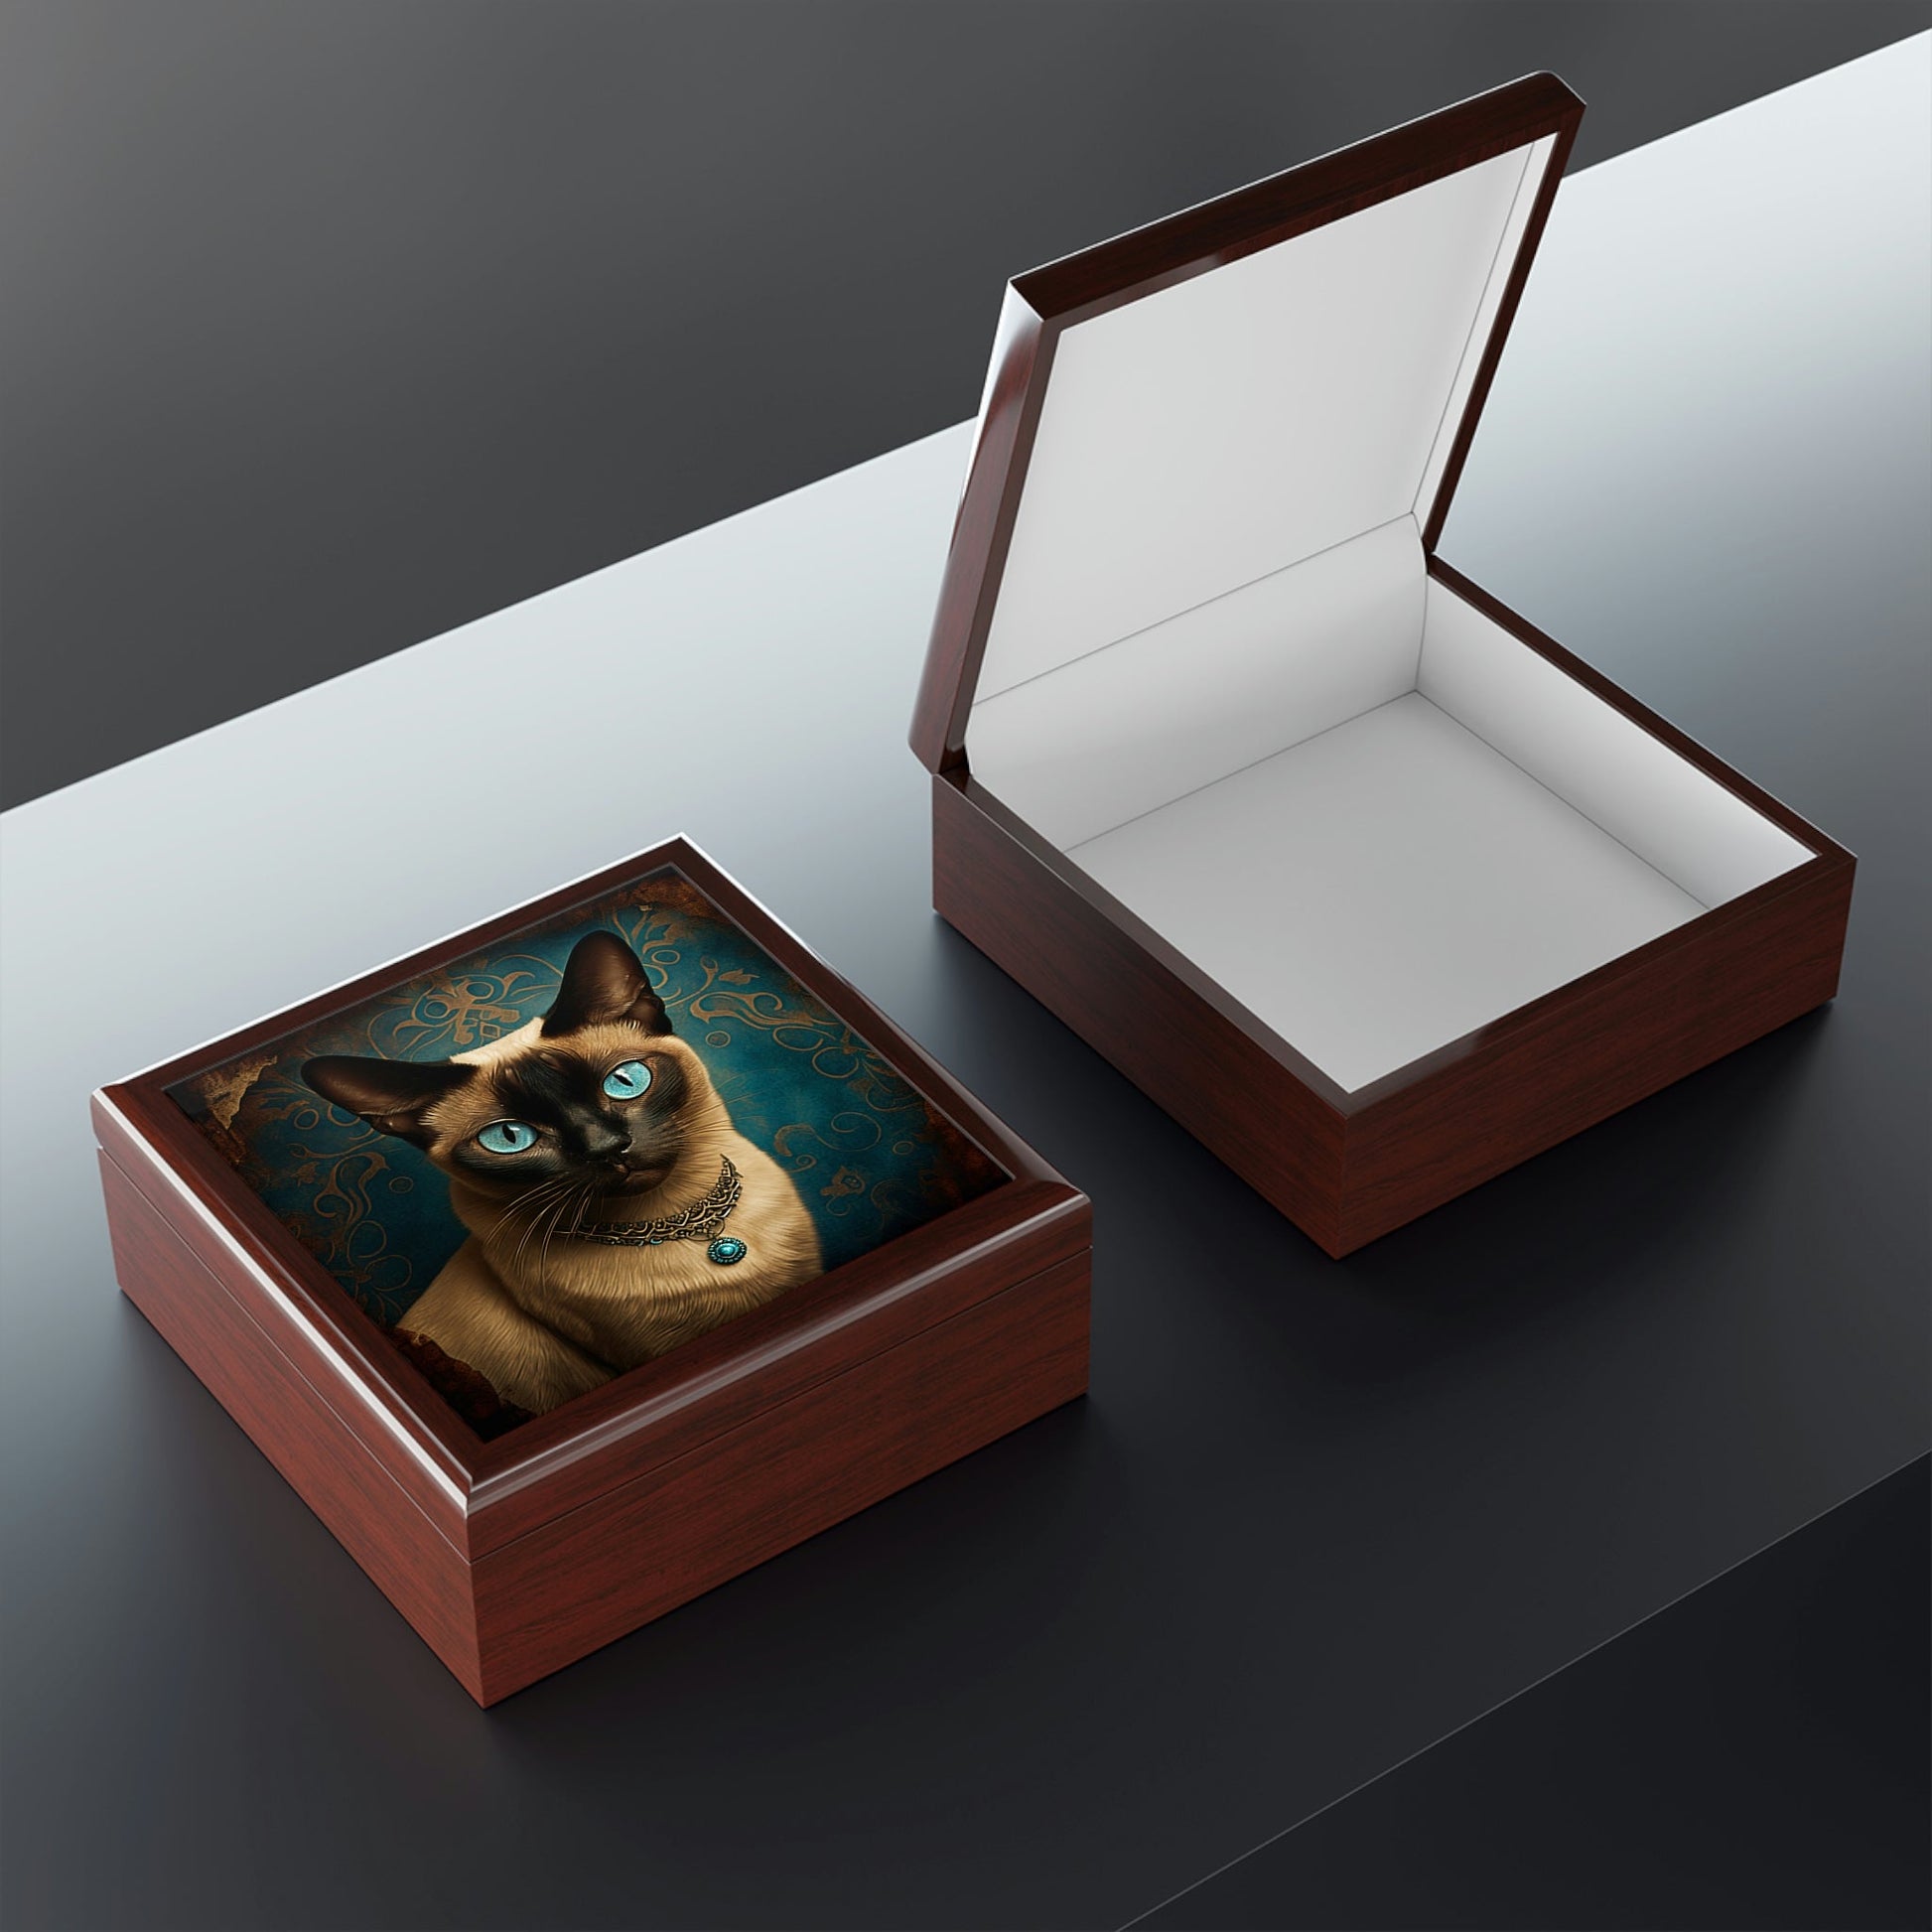 Siamese Cat Jewelry Keepsake Box - Jewelry Travel Case,Bridesmaid Proposal Gift,Bridal Party Gift,Jewelry Case,Gifts for Her